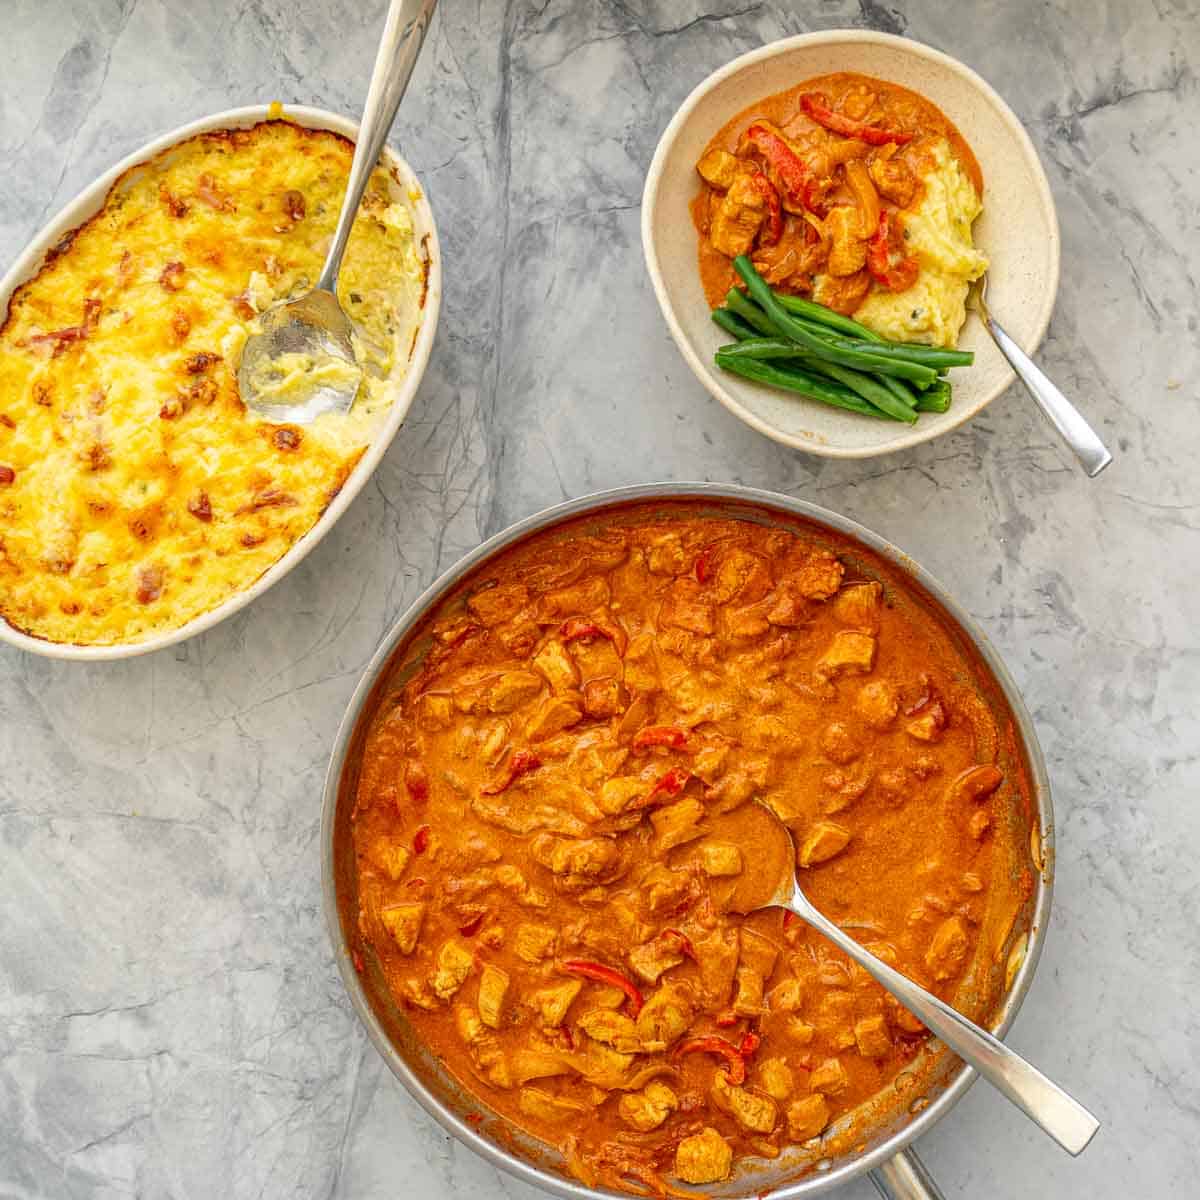 Dishes of Golden brown baked mashed potatoes and chicken Paprikash on the bench next to a serving of the Chicken Parprikash over a big spoonful of the-potatoes. anda side of beans 